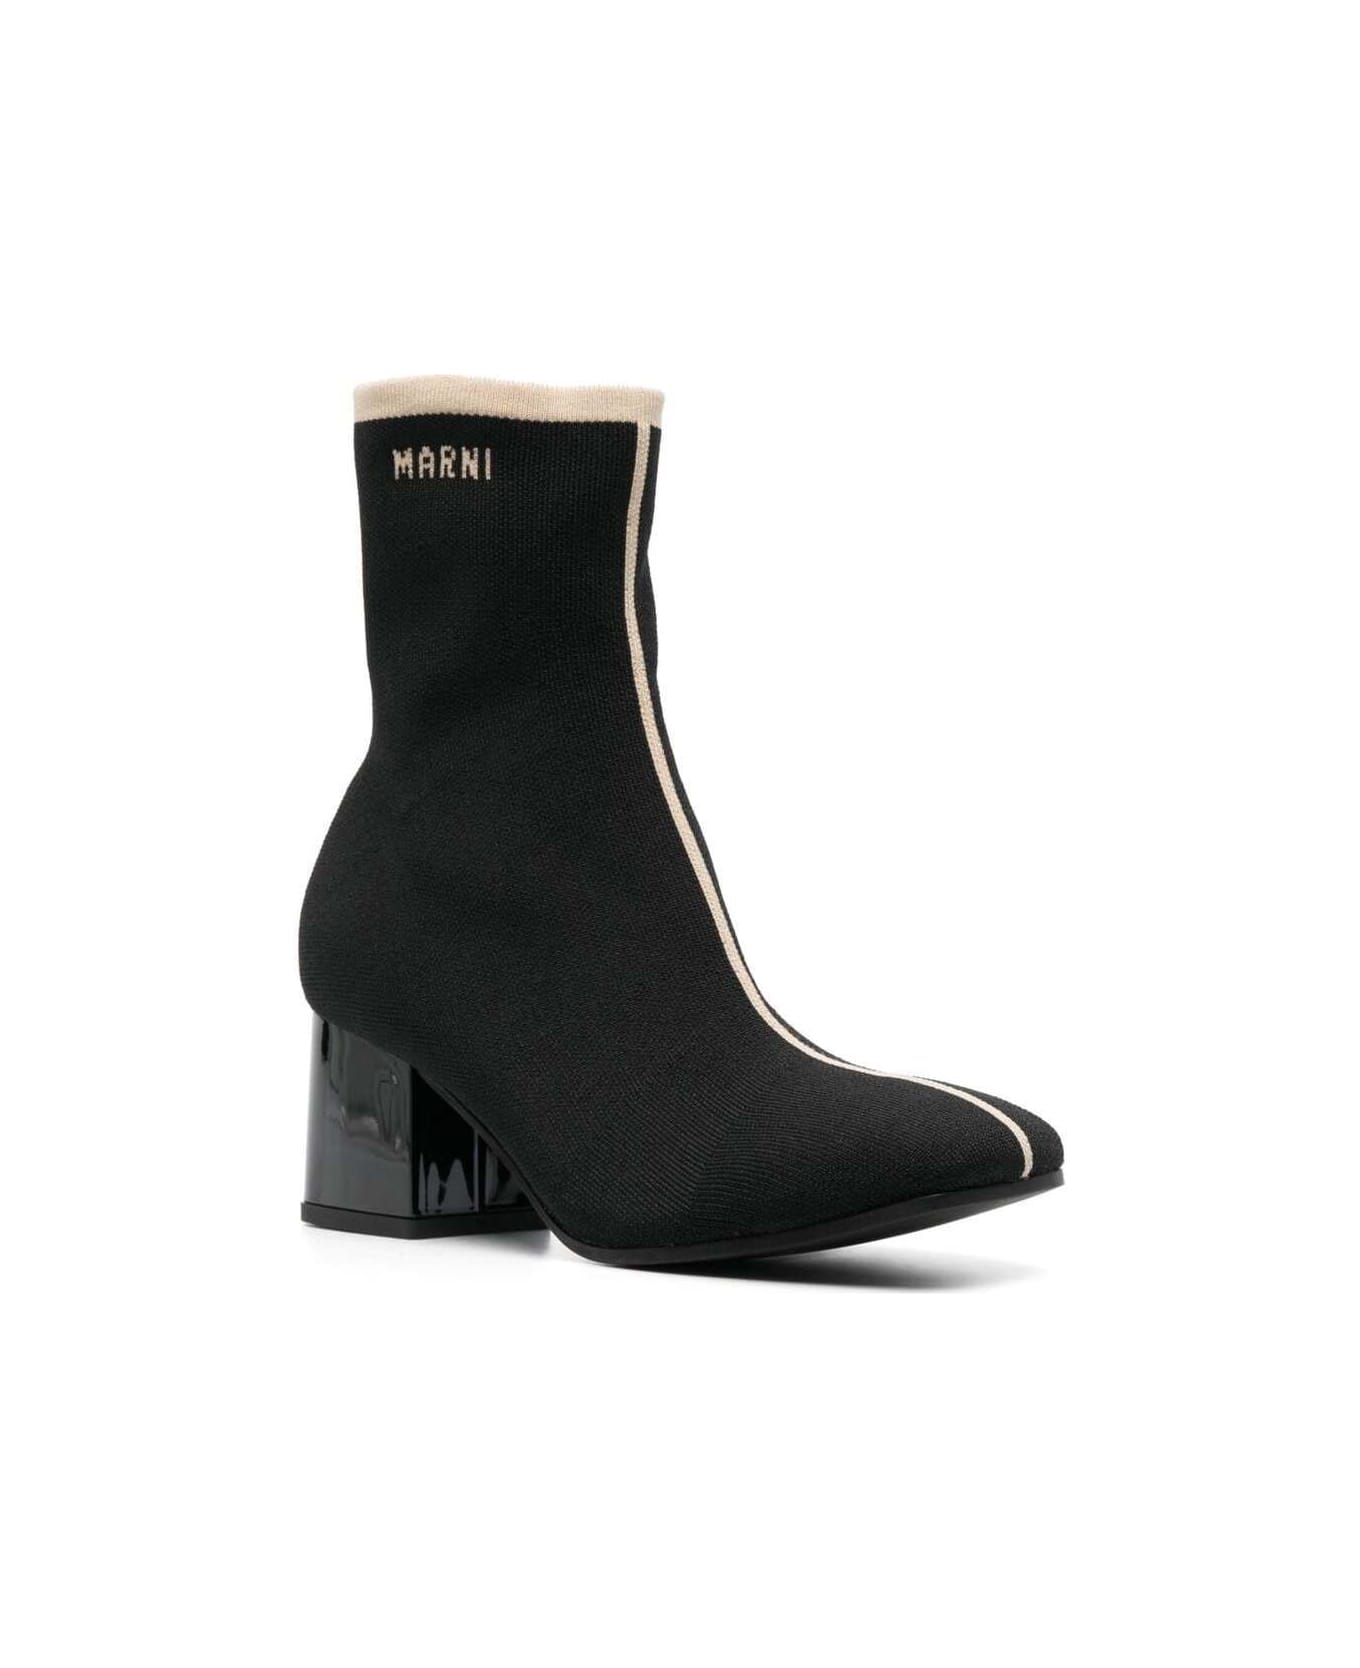 Marni Black Ankle Boot In Leather With Medium And Wide Heel Ecru-colored Details - Black